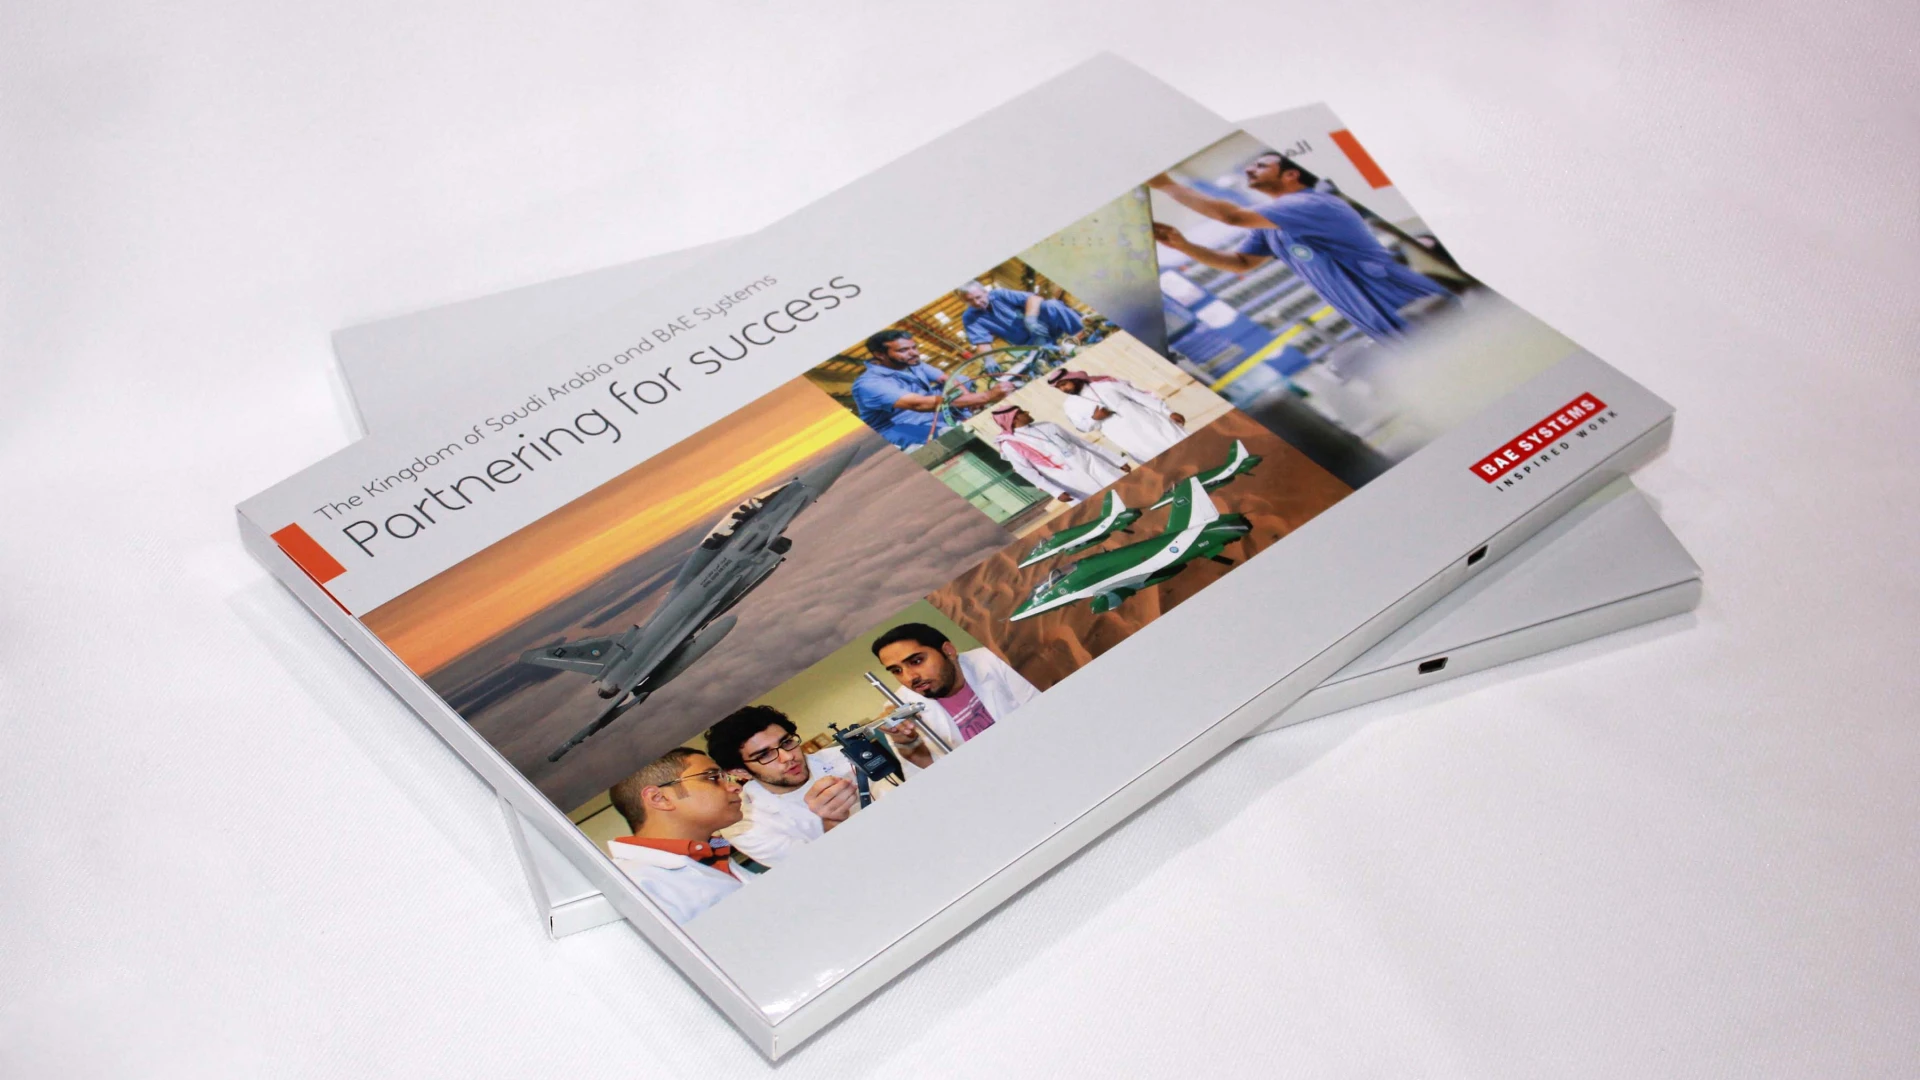 BAE Systems Video Brochure, 